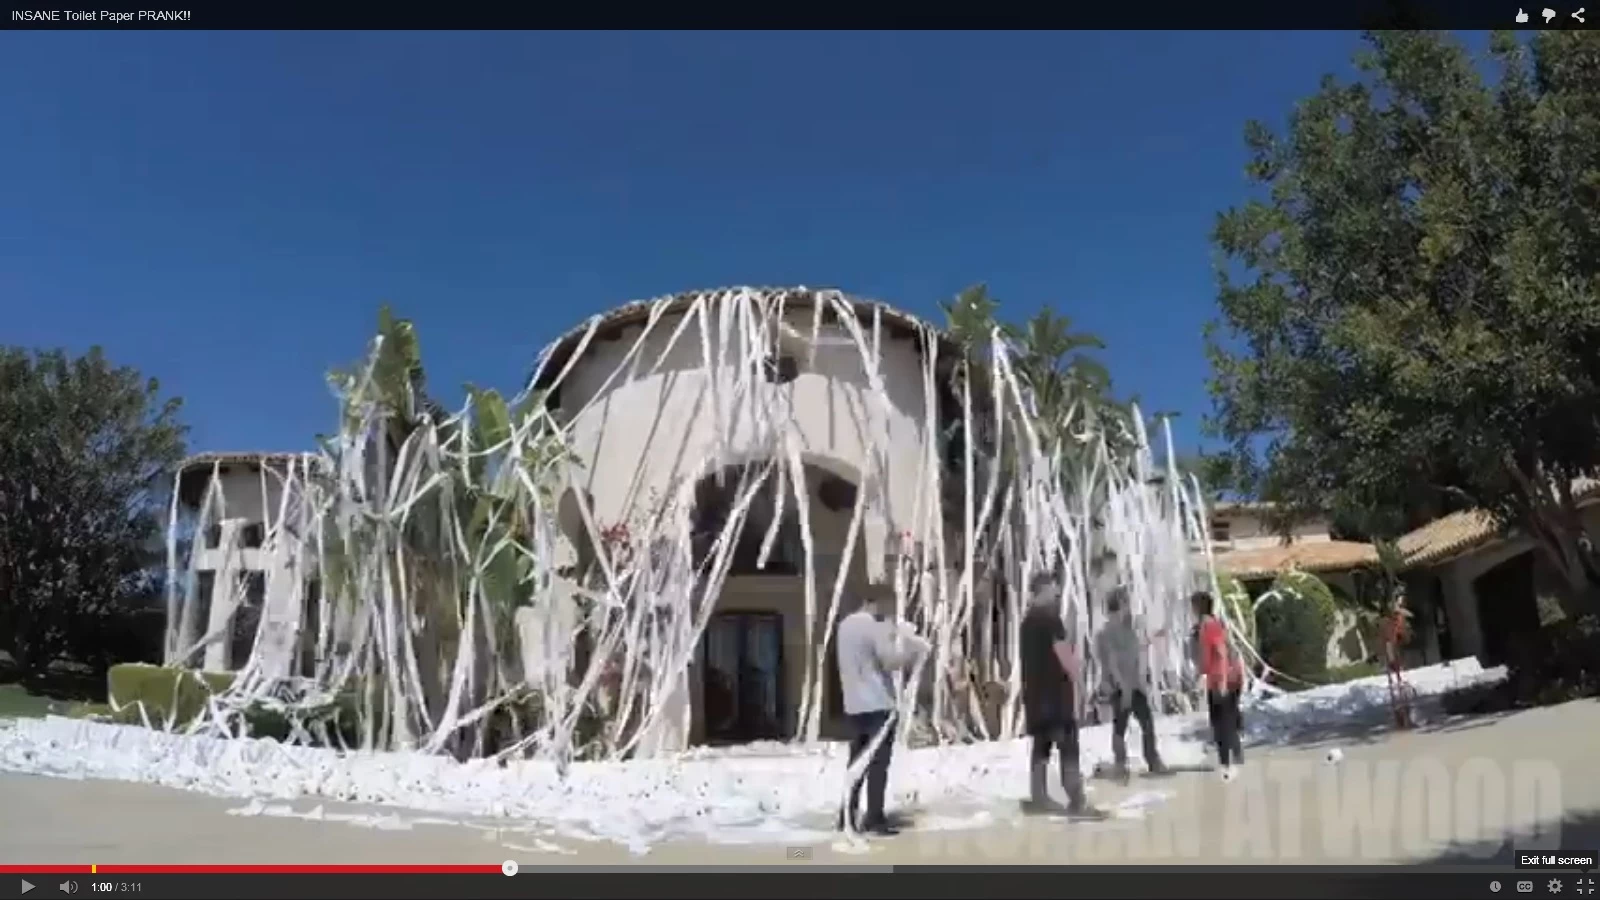 Howie Mandel's House Covered in 4,000 Rolls of Toilet Paper